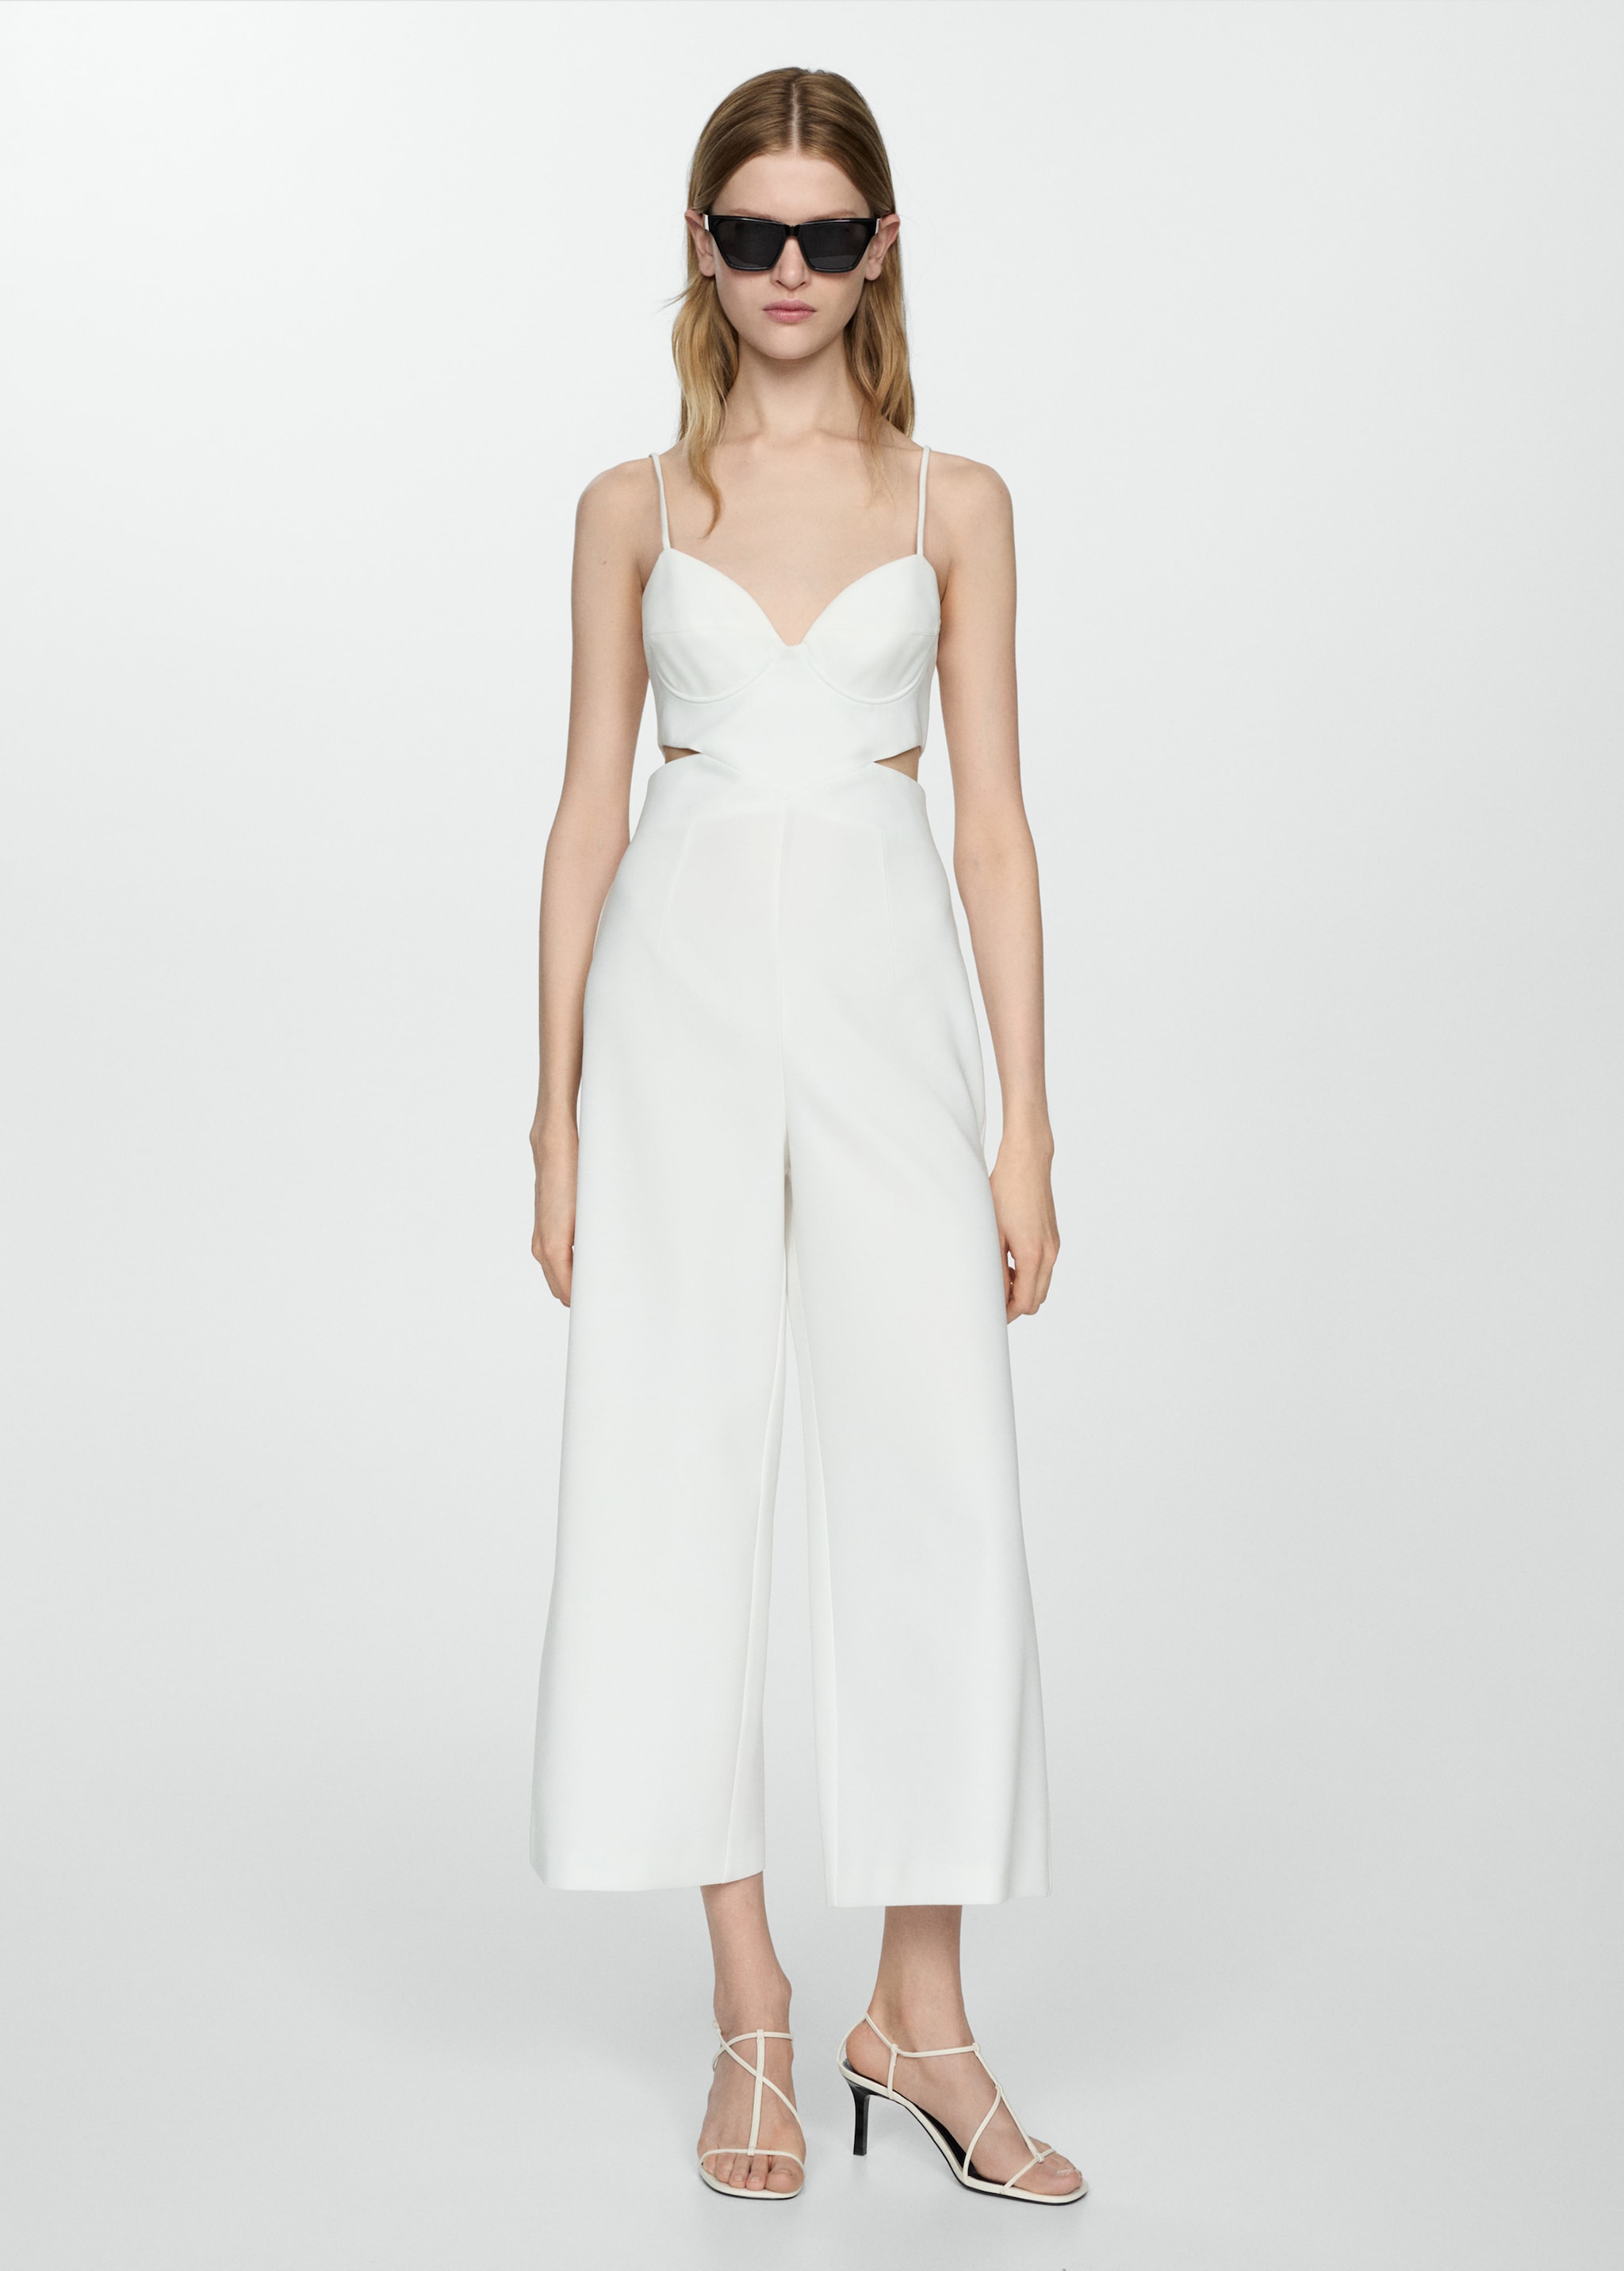 Jumpsuit with straps and side slits - General plane